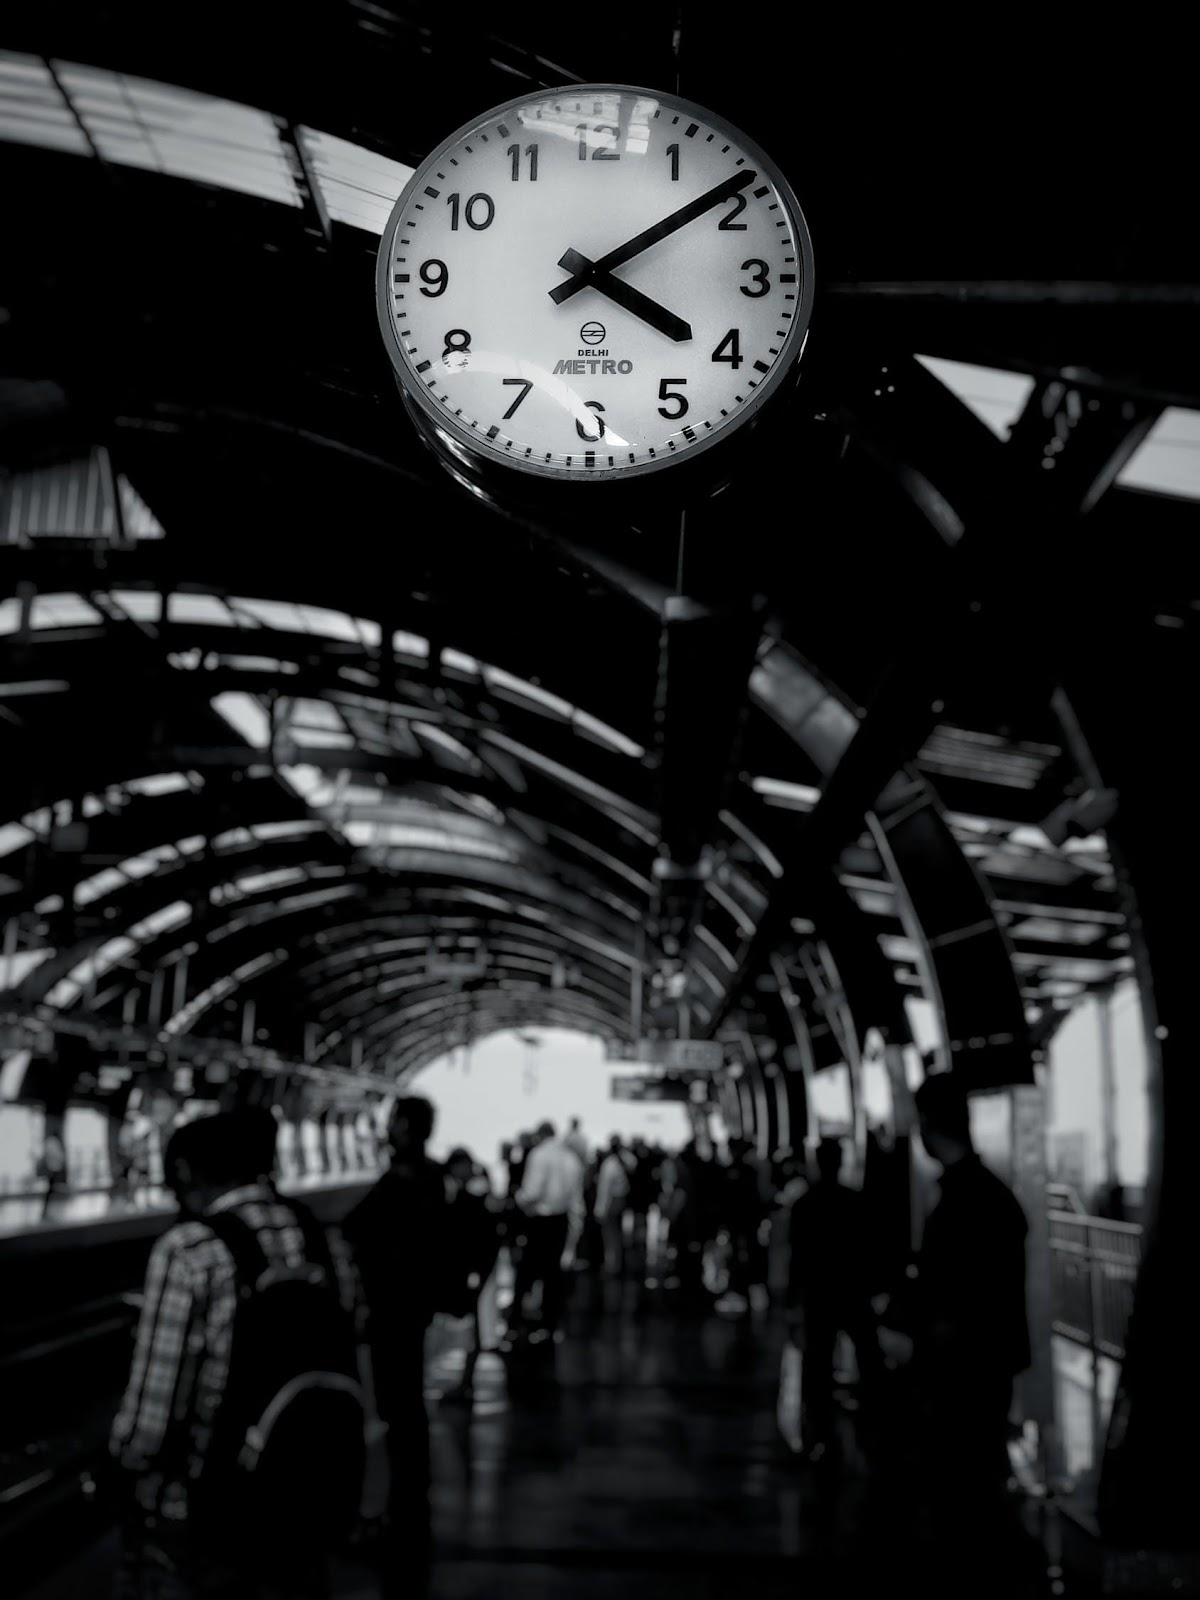 Grayscale Photography of Train Clock Reads at 4:09